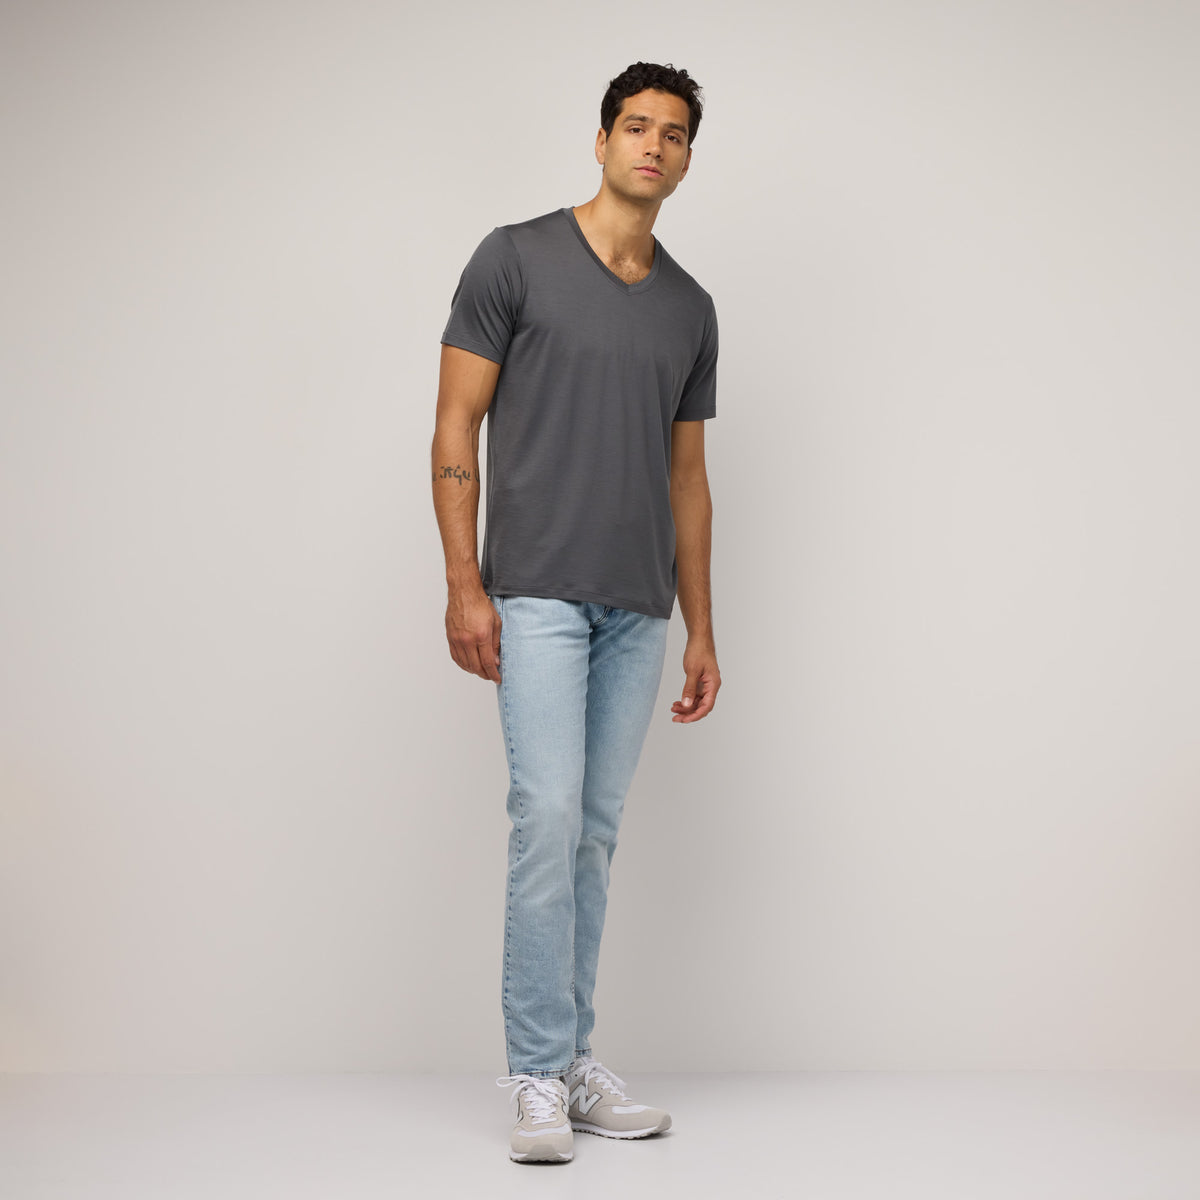 image-on-hover,model-spec: Zach is 6'4", 185 lbs, and wears size L